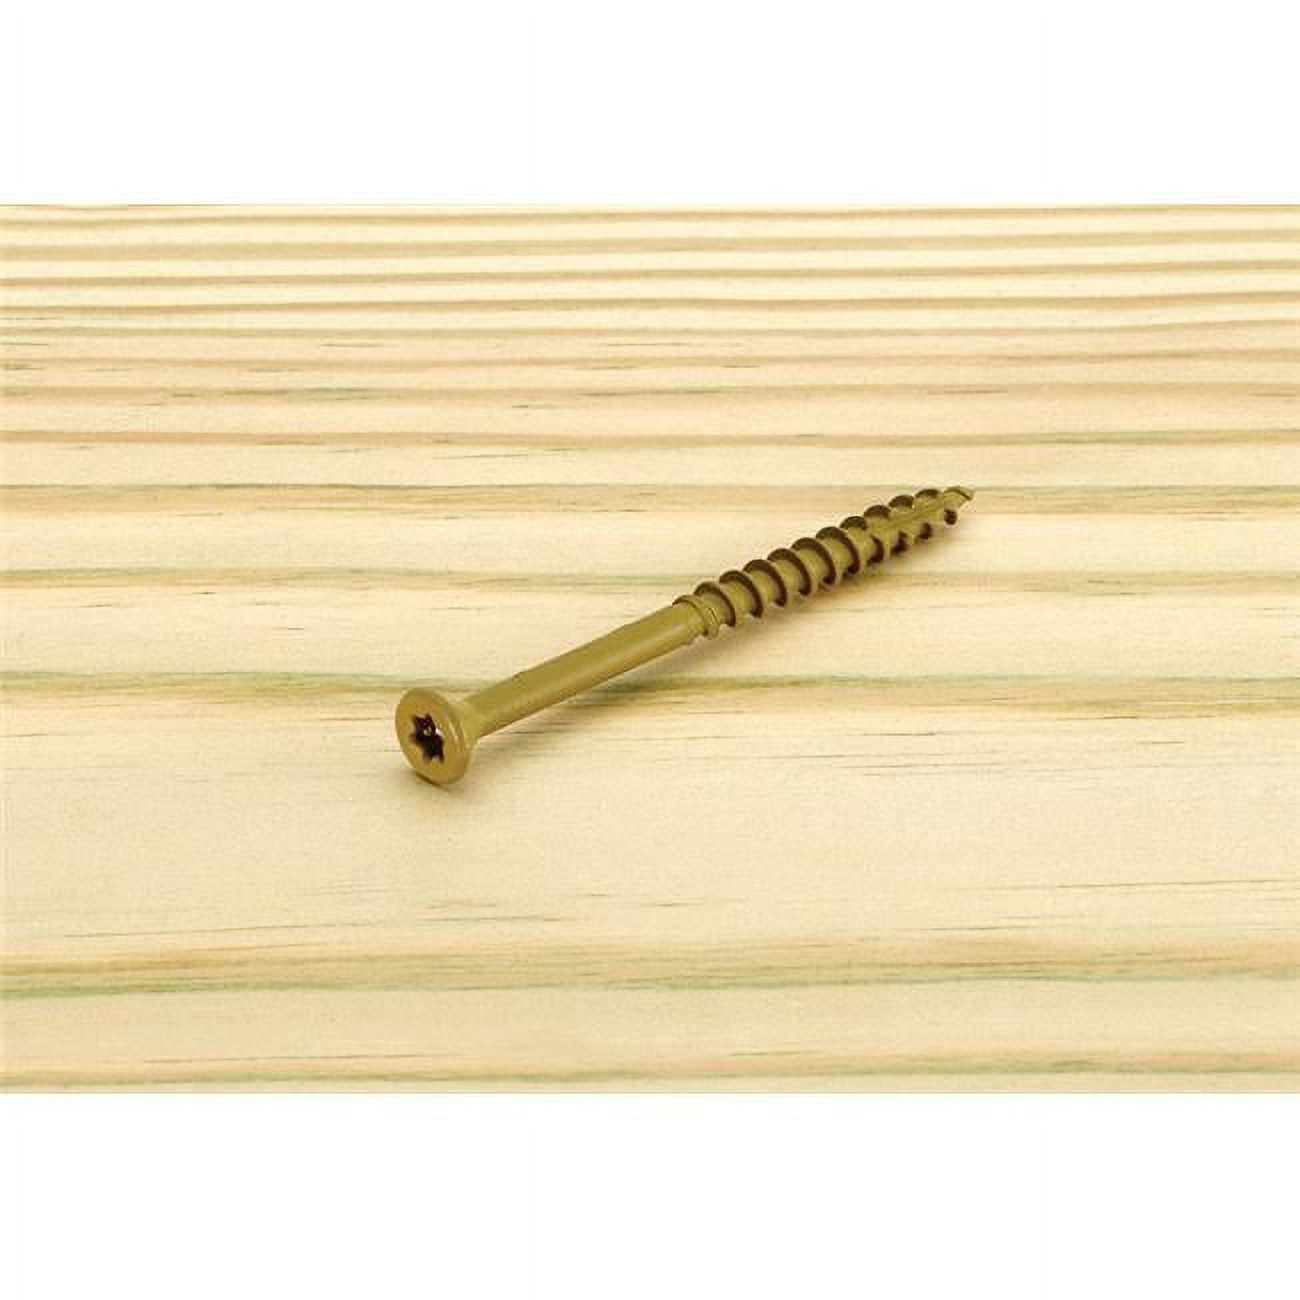 5001355 No.9 X 3 In. Star Flat Head Epoxy Coated Carbon Steel Deck Screws, Pack Of 2000